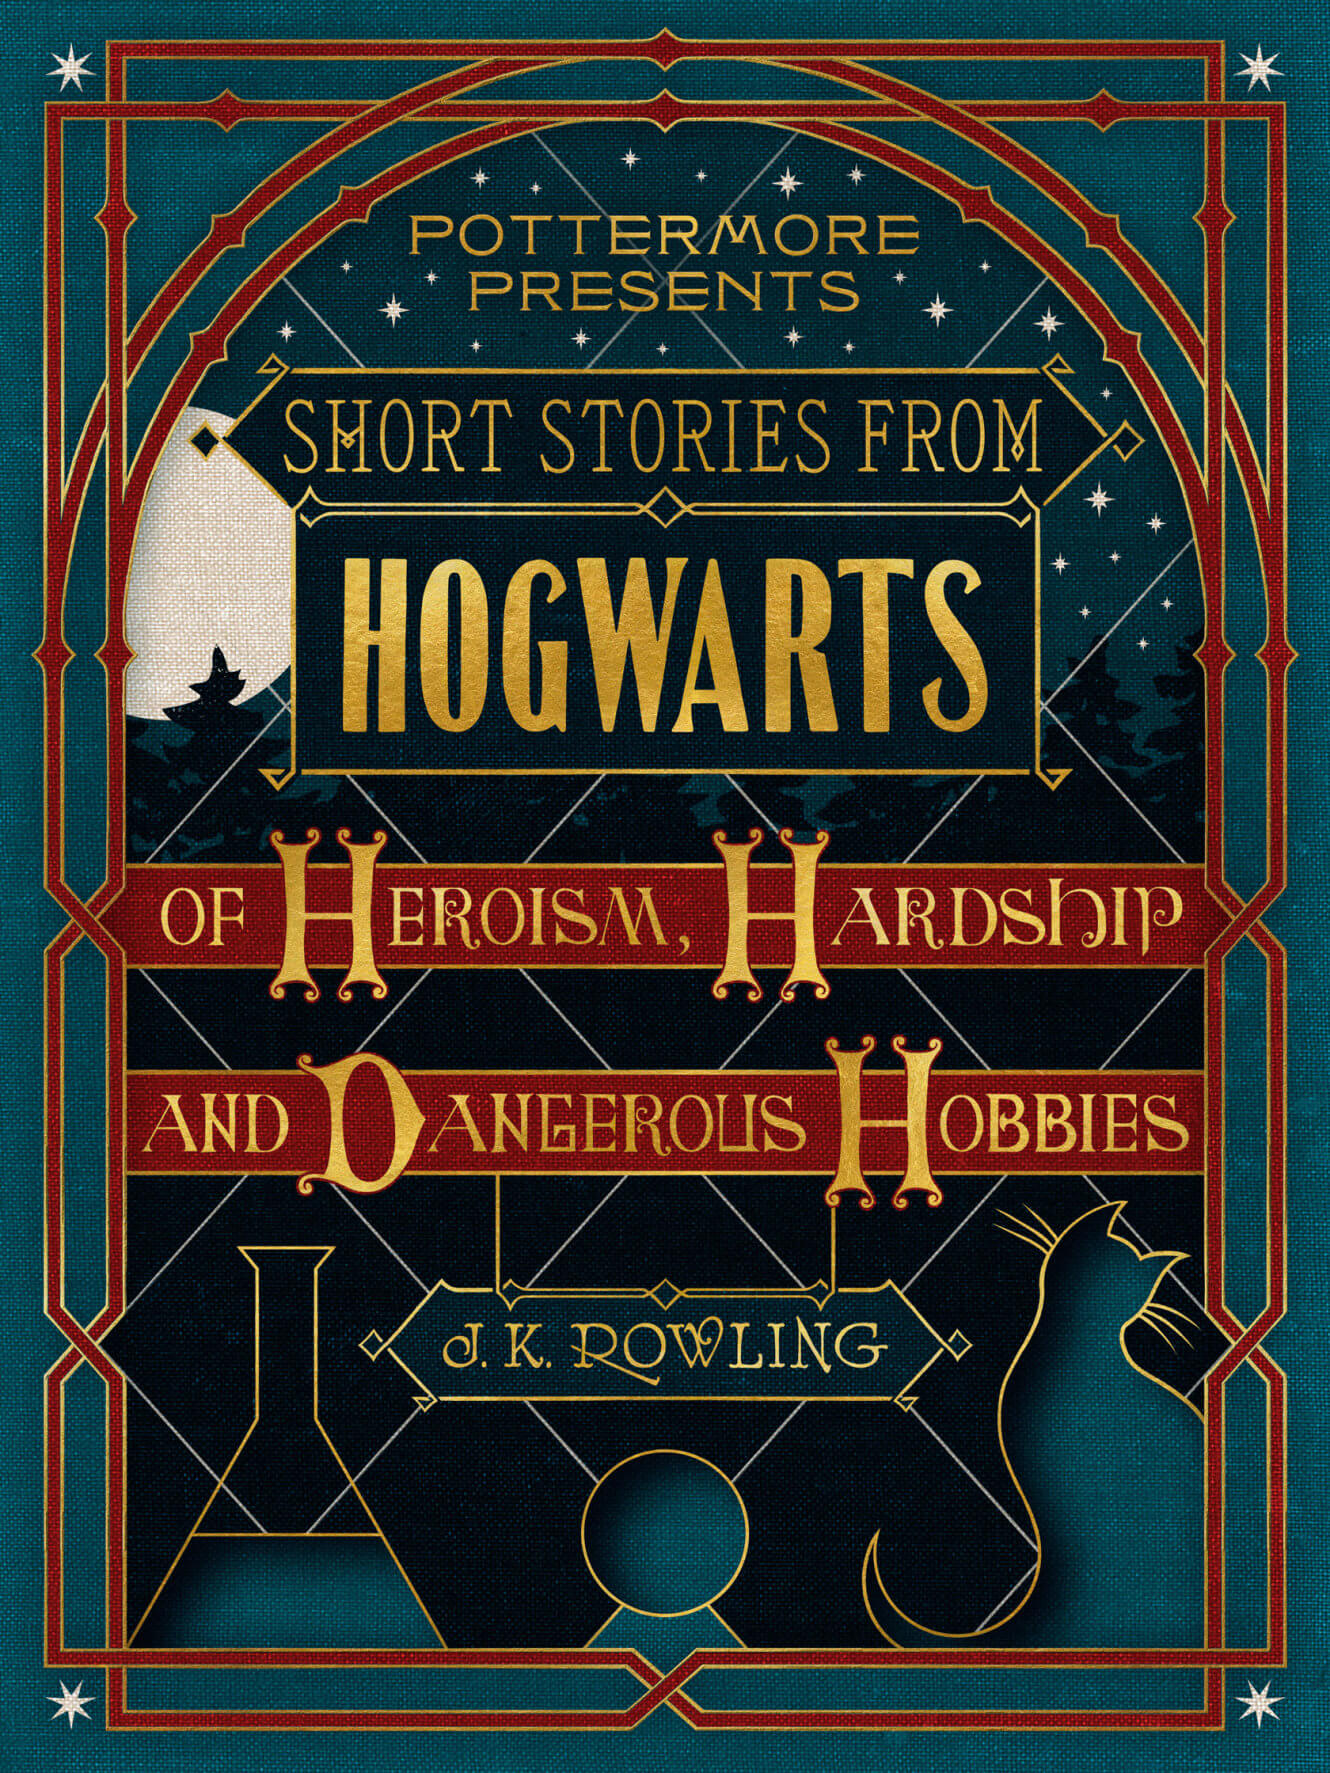 The cover of Pottermore Presents eBook, Short Stories from Hogwarts of Heroism, Hardship and Dangerous Hobbies.